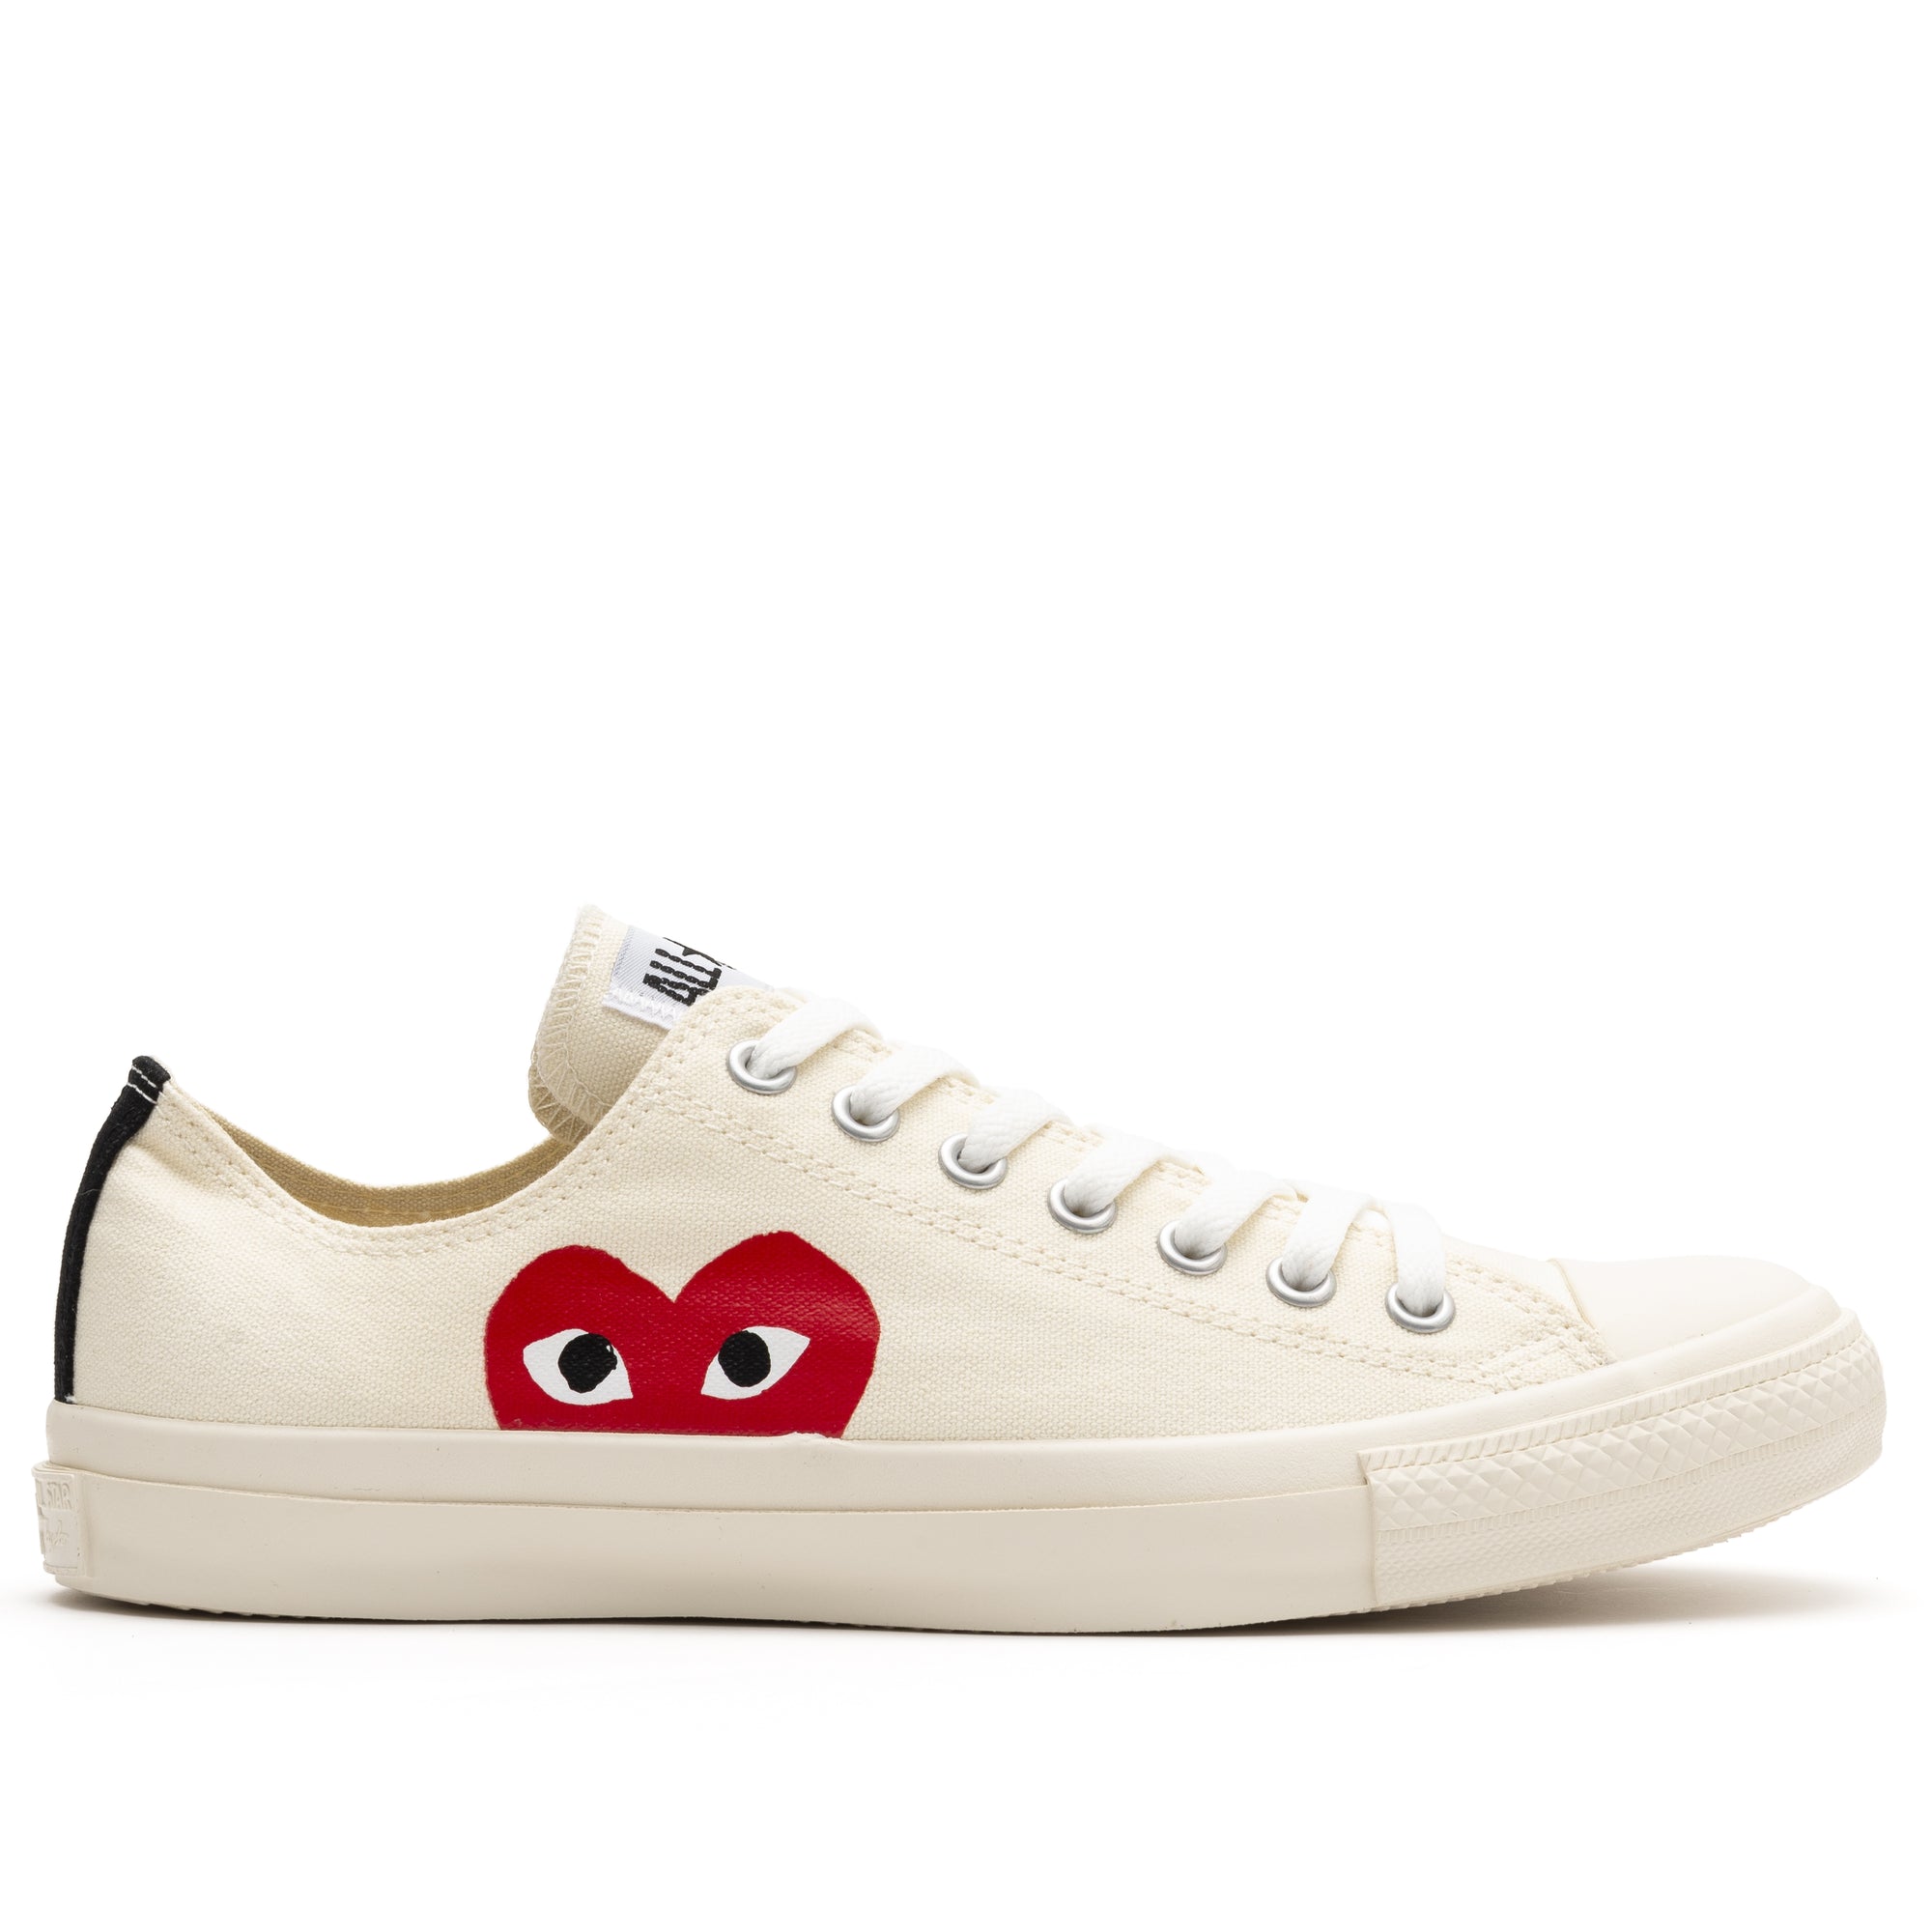 PLAY CDG CONVERSE - Allstar Low - (White) view 1